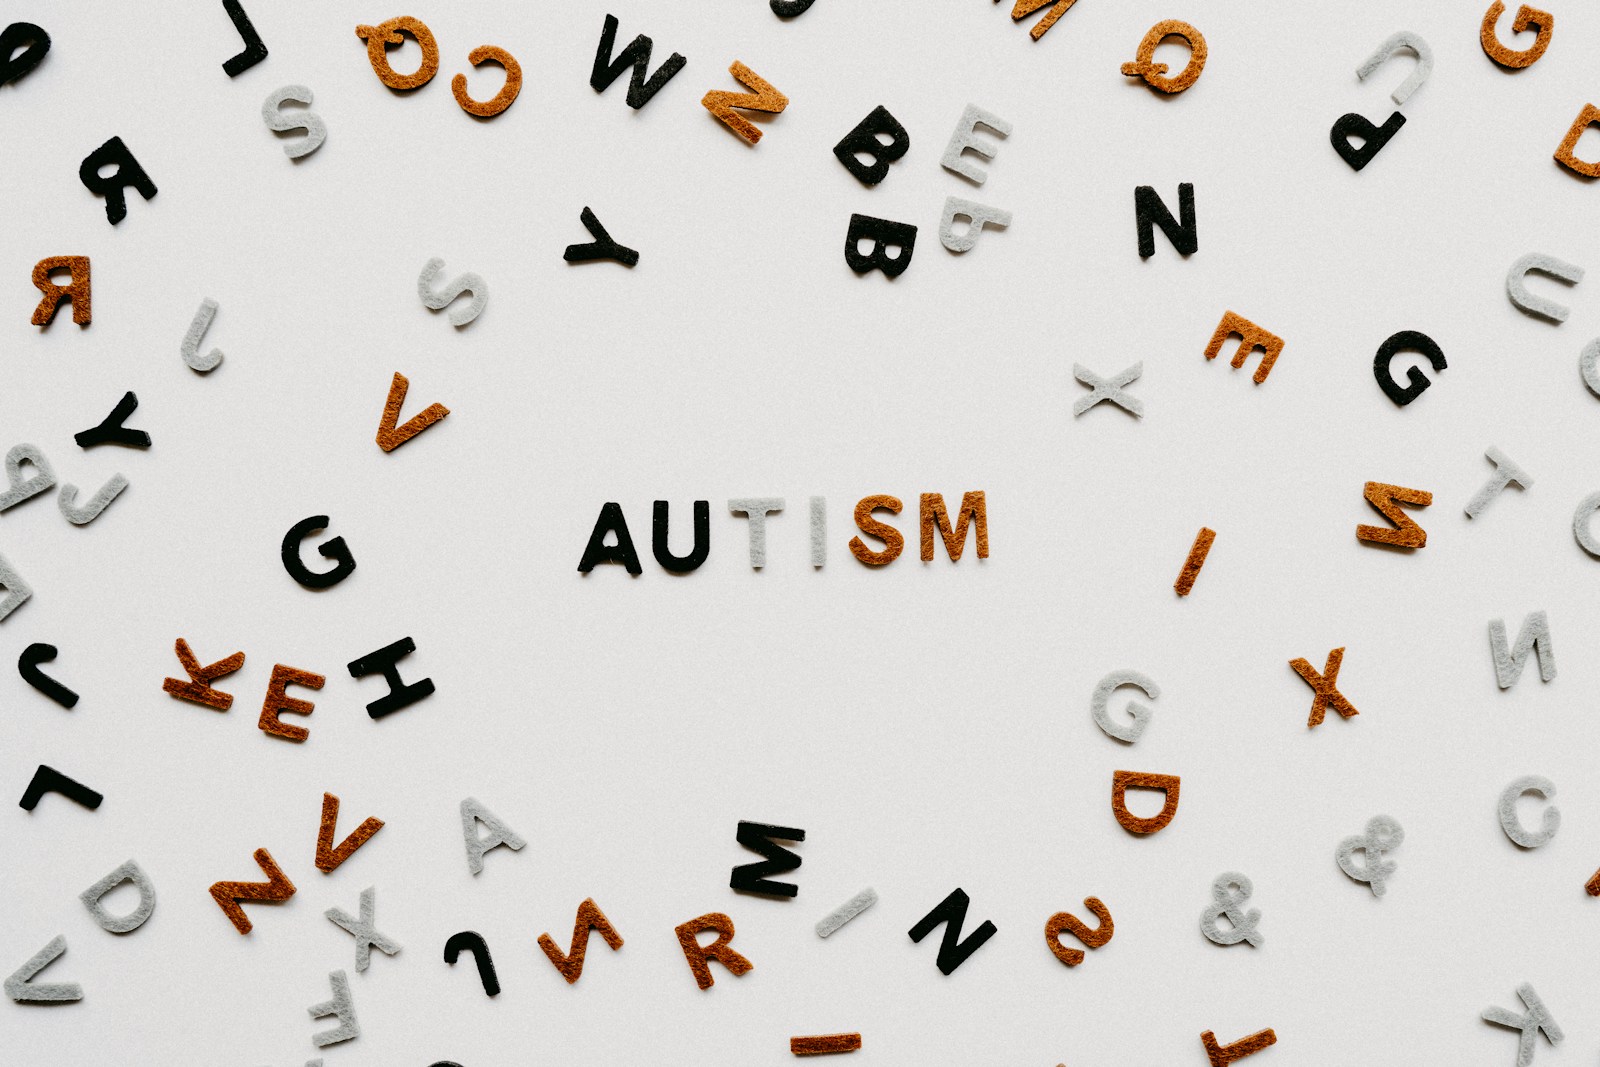 What Makes Autism Worse